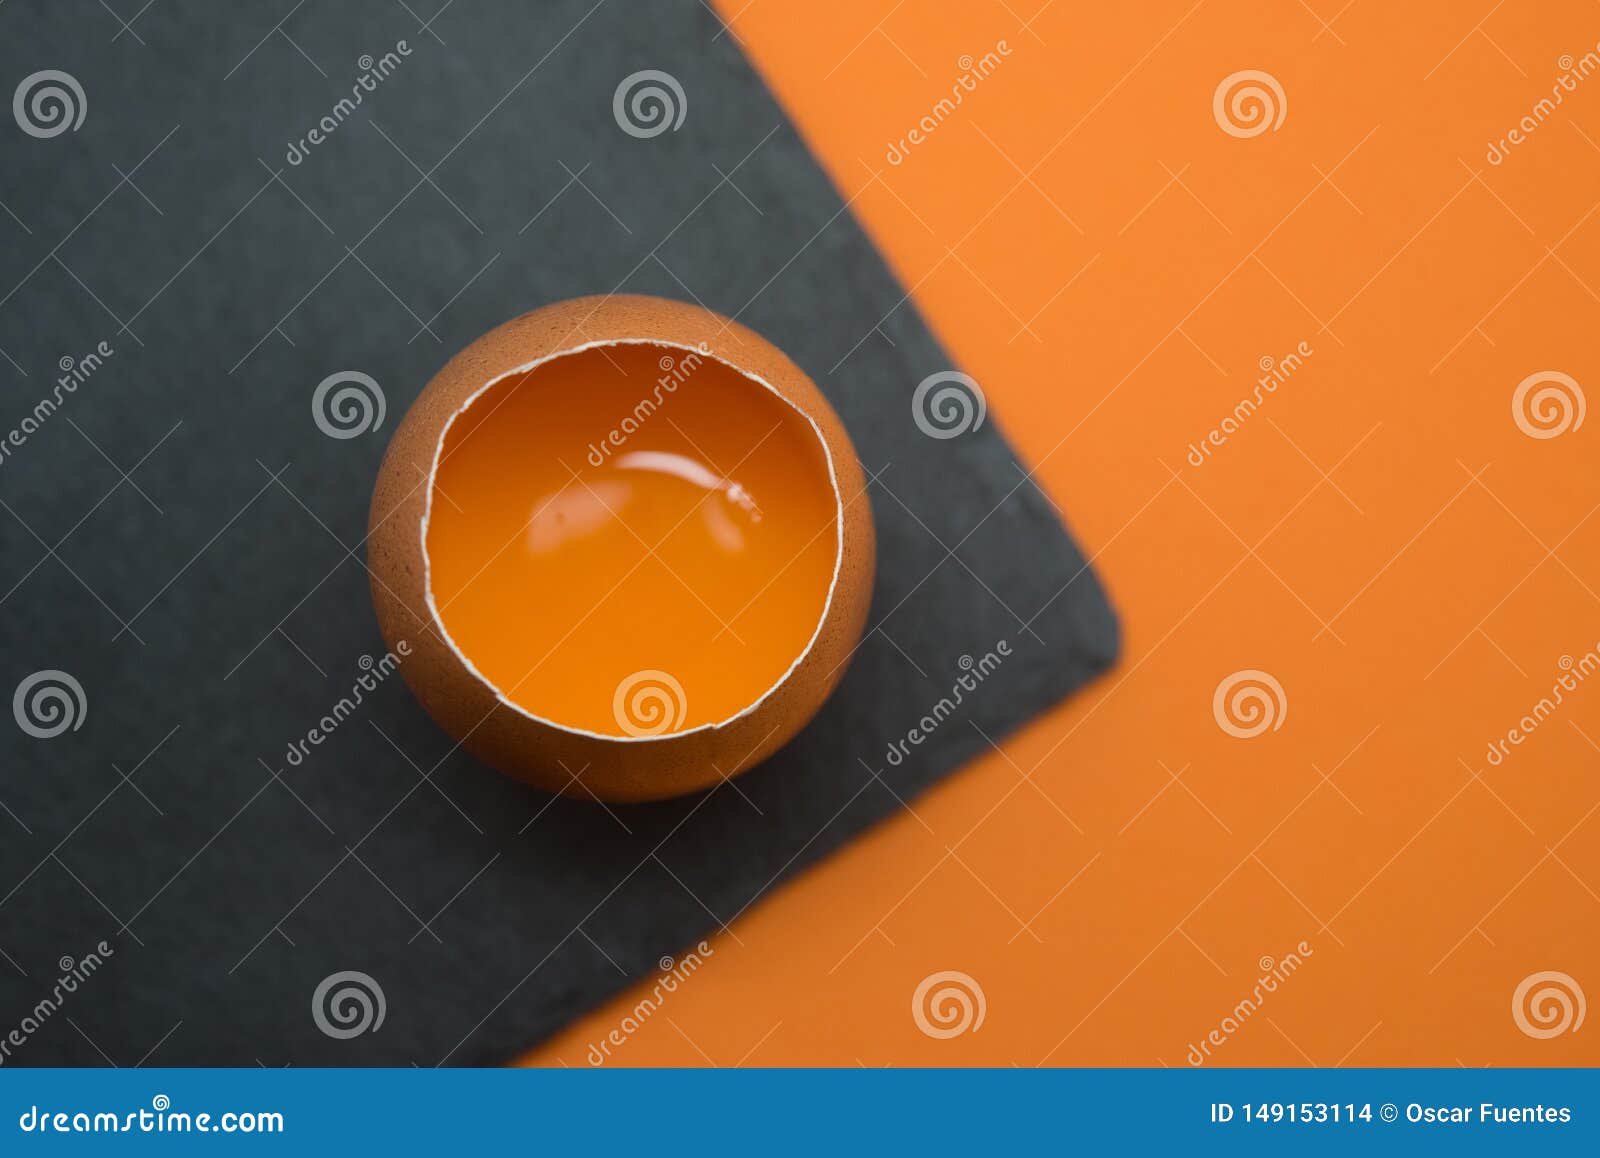 open egg with the yolk on the orange background.